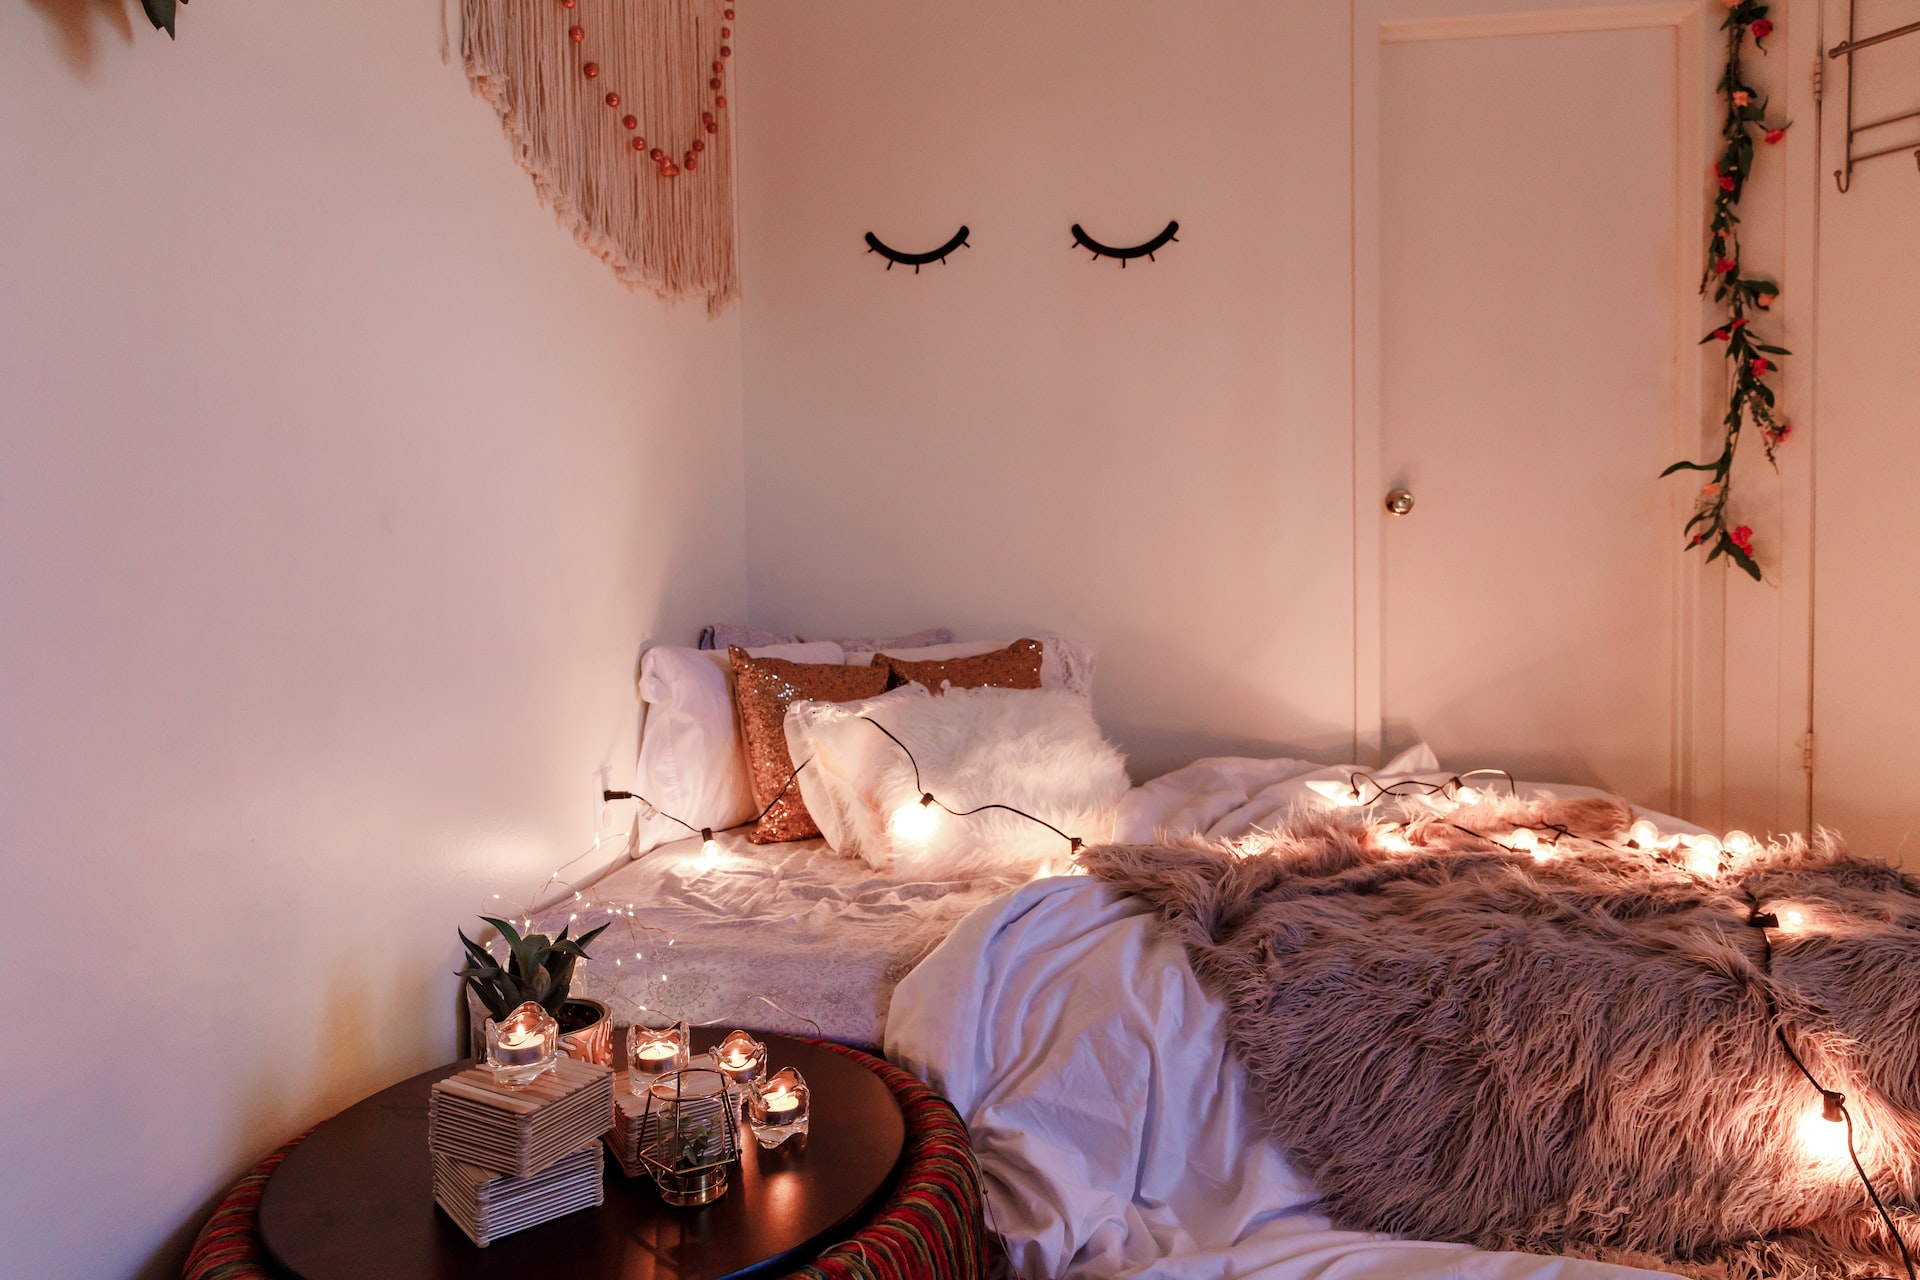 8 Ways To Make Your Bedroom A Calm And Peaceful Place